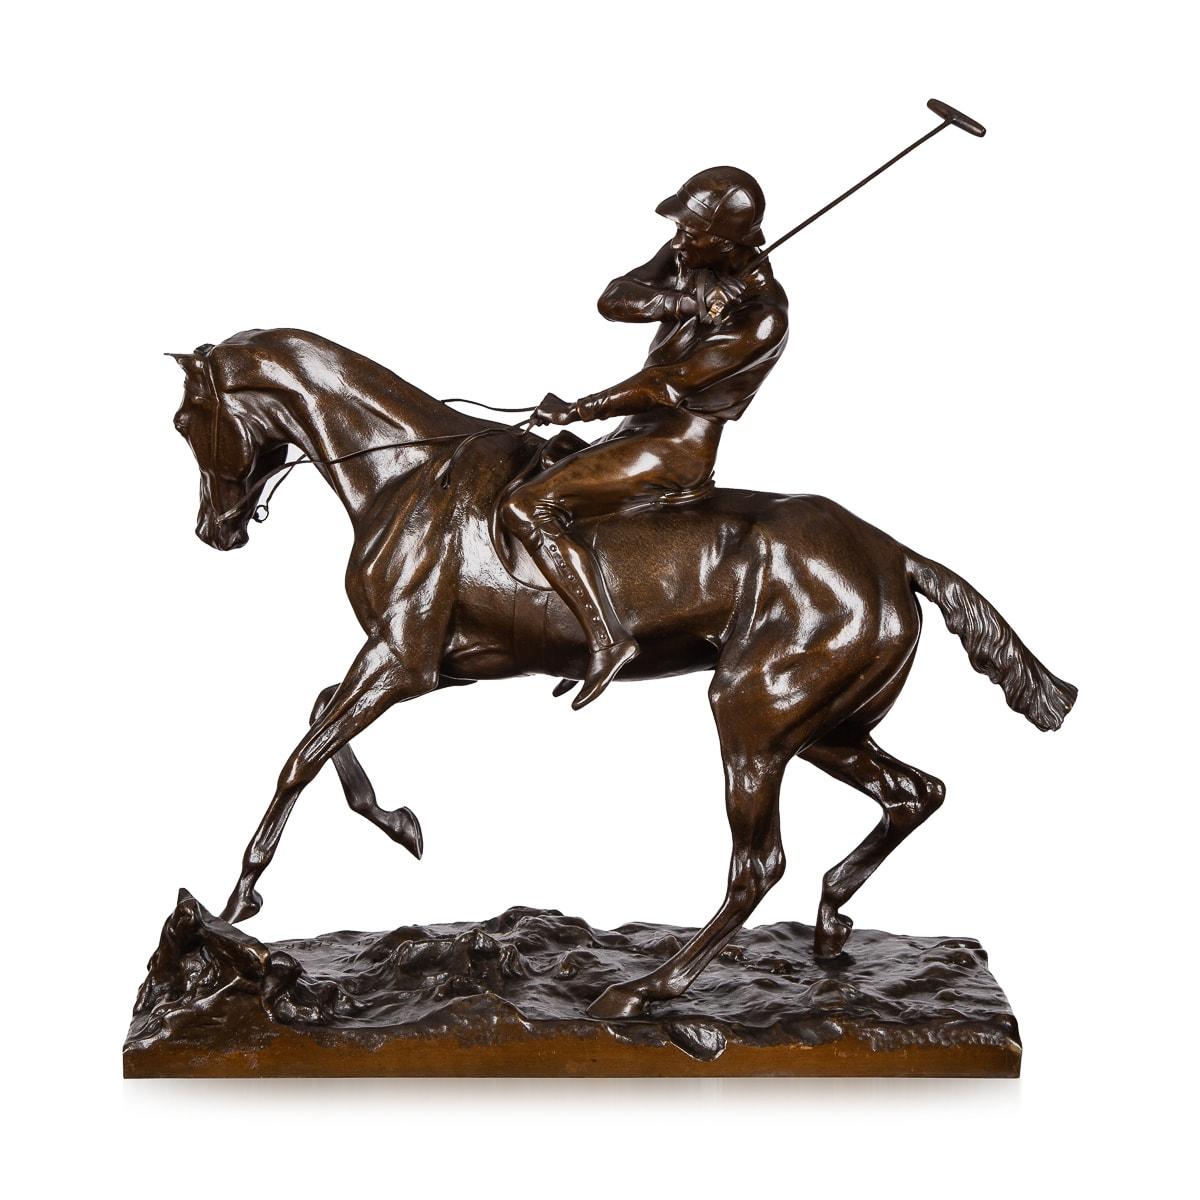 Antique 19th Century French bronze of of a polo player signed J Cuvelier and cast and inscribed to base by H Lippens & CIE. Cuvelier began exhibiting at the Paris Salon in 1867, and exhibited this model of a polo player there as well other bronzes.